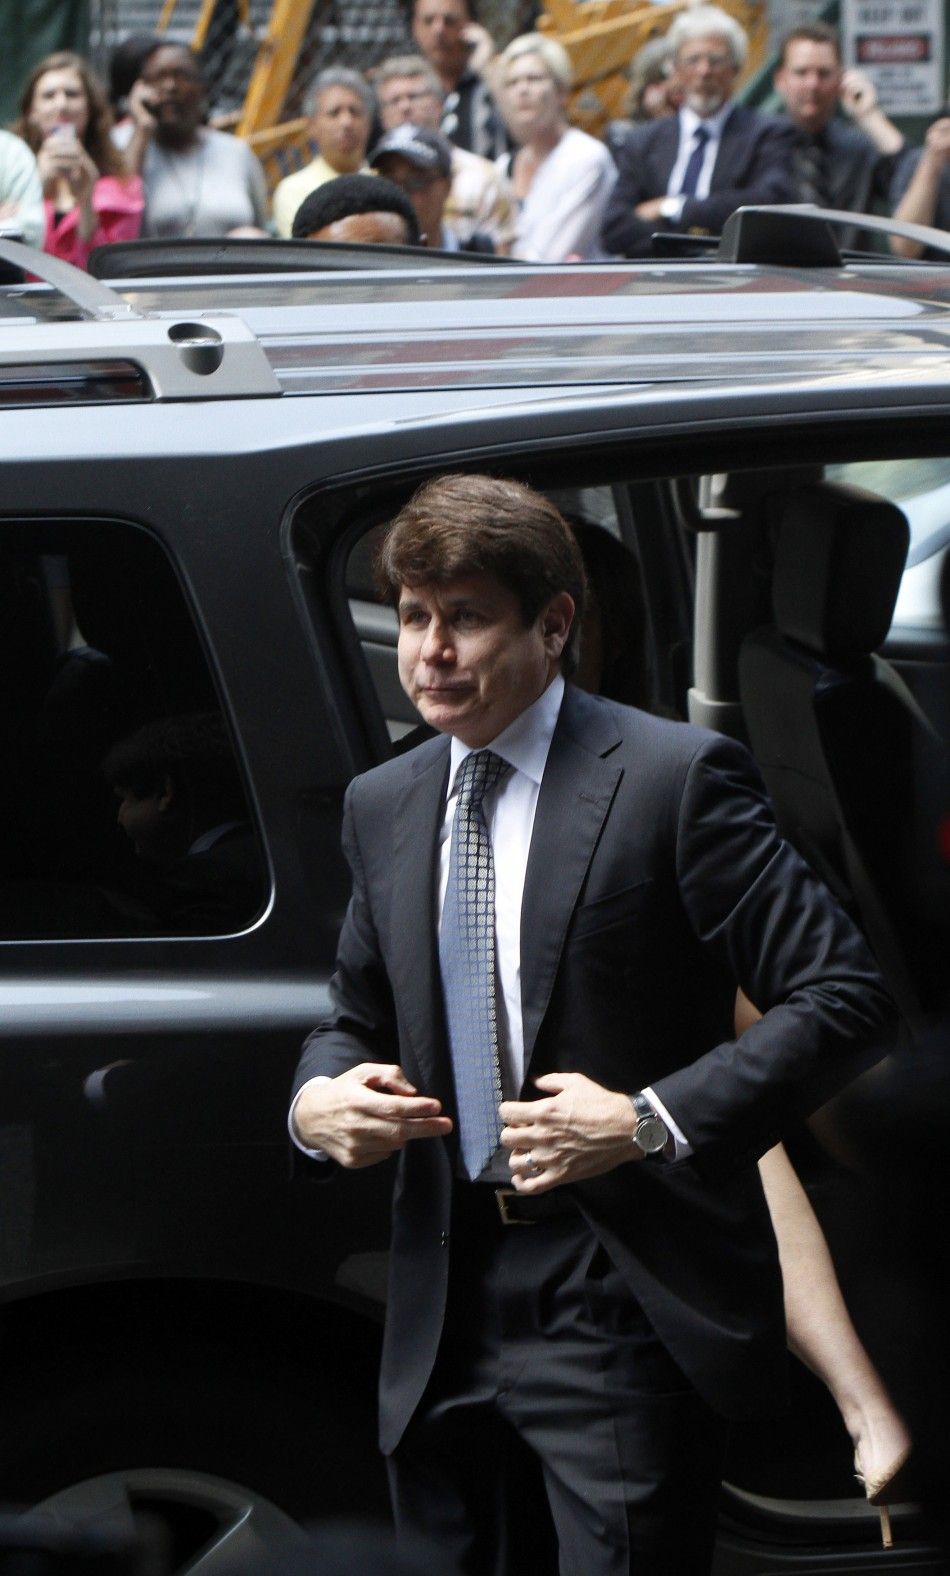 Former Illinois Governor Rod Blagojevich exits his vehicle as he prepares to enter the Dirksen Federal building to hear the verdict on his second corruption trial in Chicago